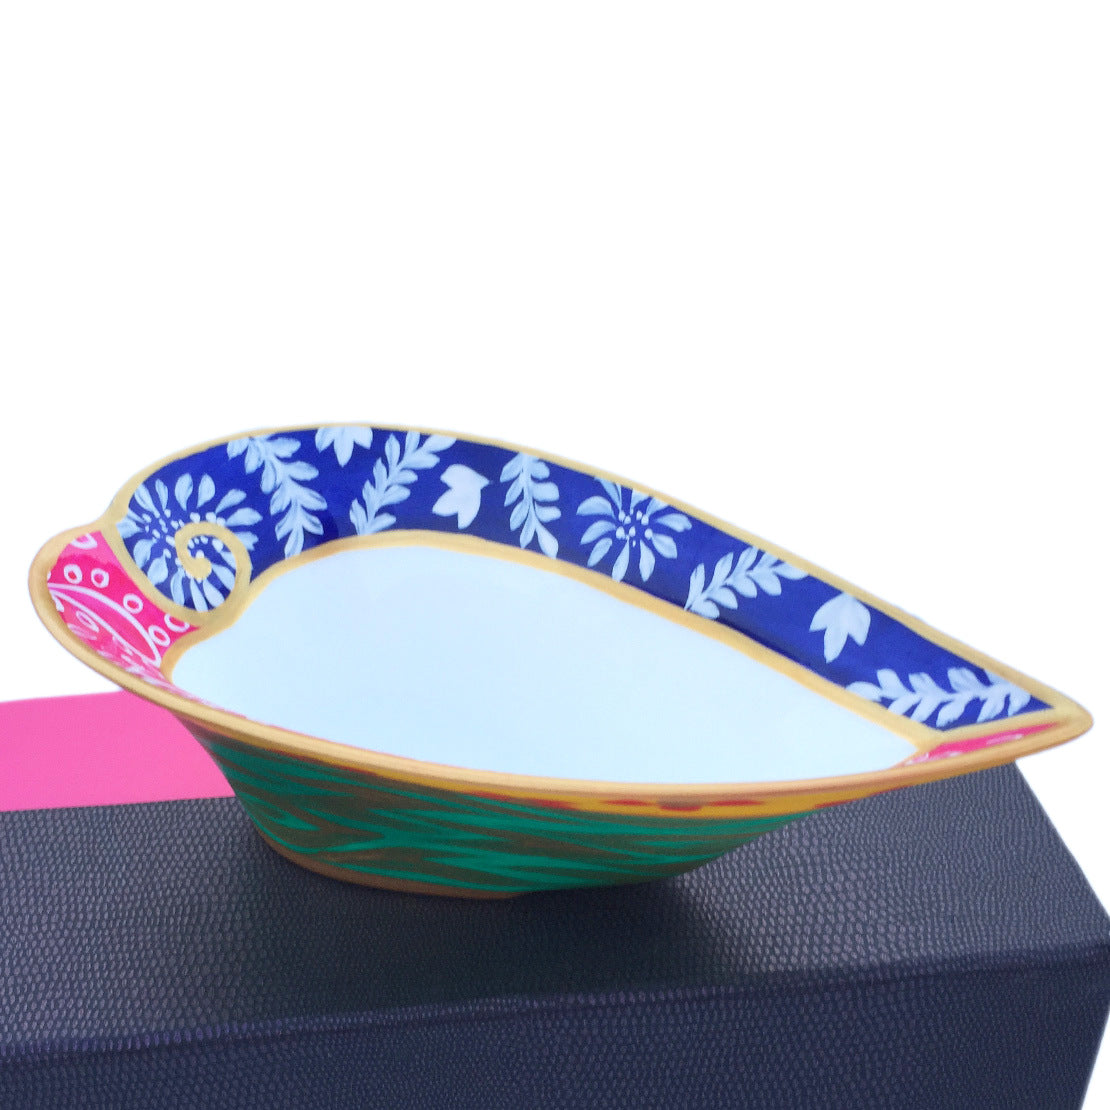 DIVERSITY - painted Heart Shaped Bowl in bone china, Gift boxed